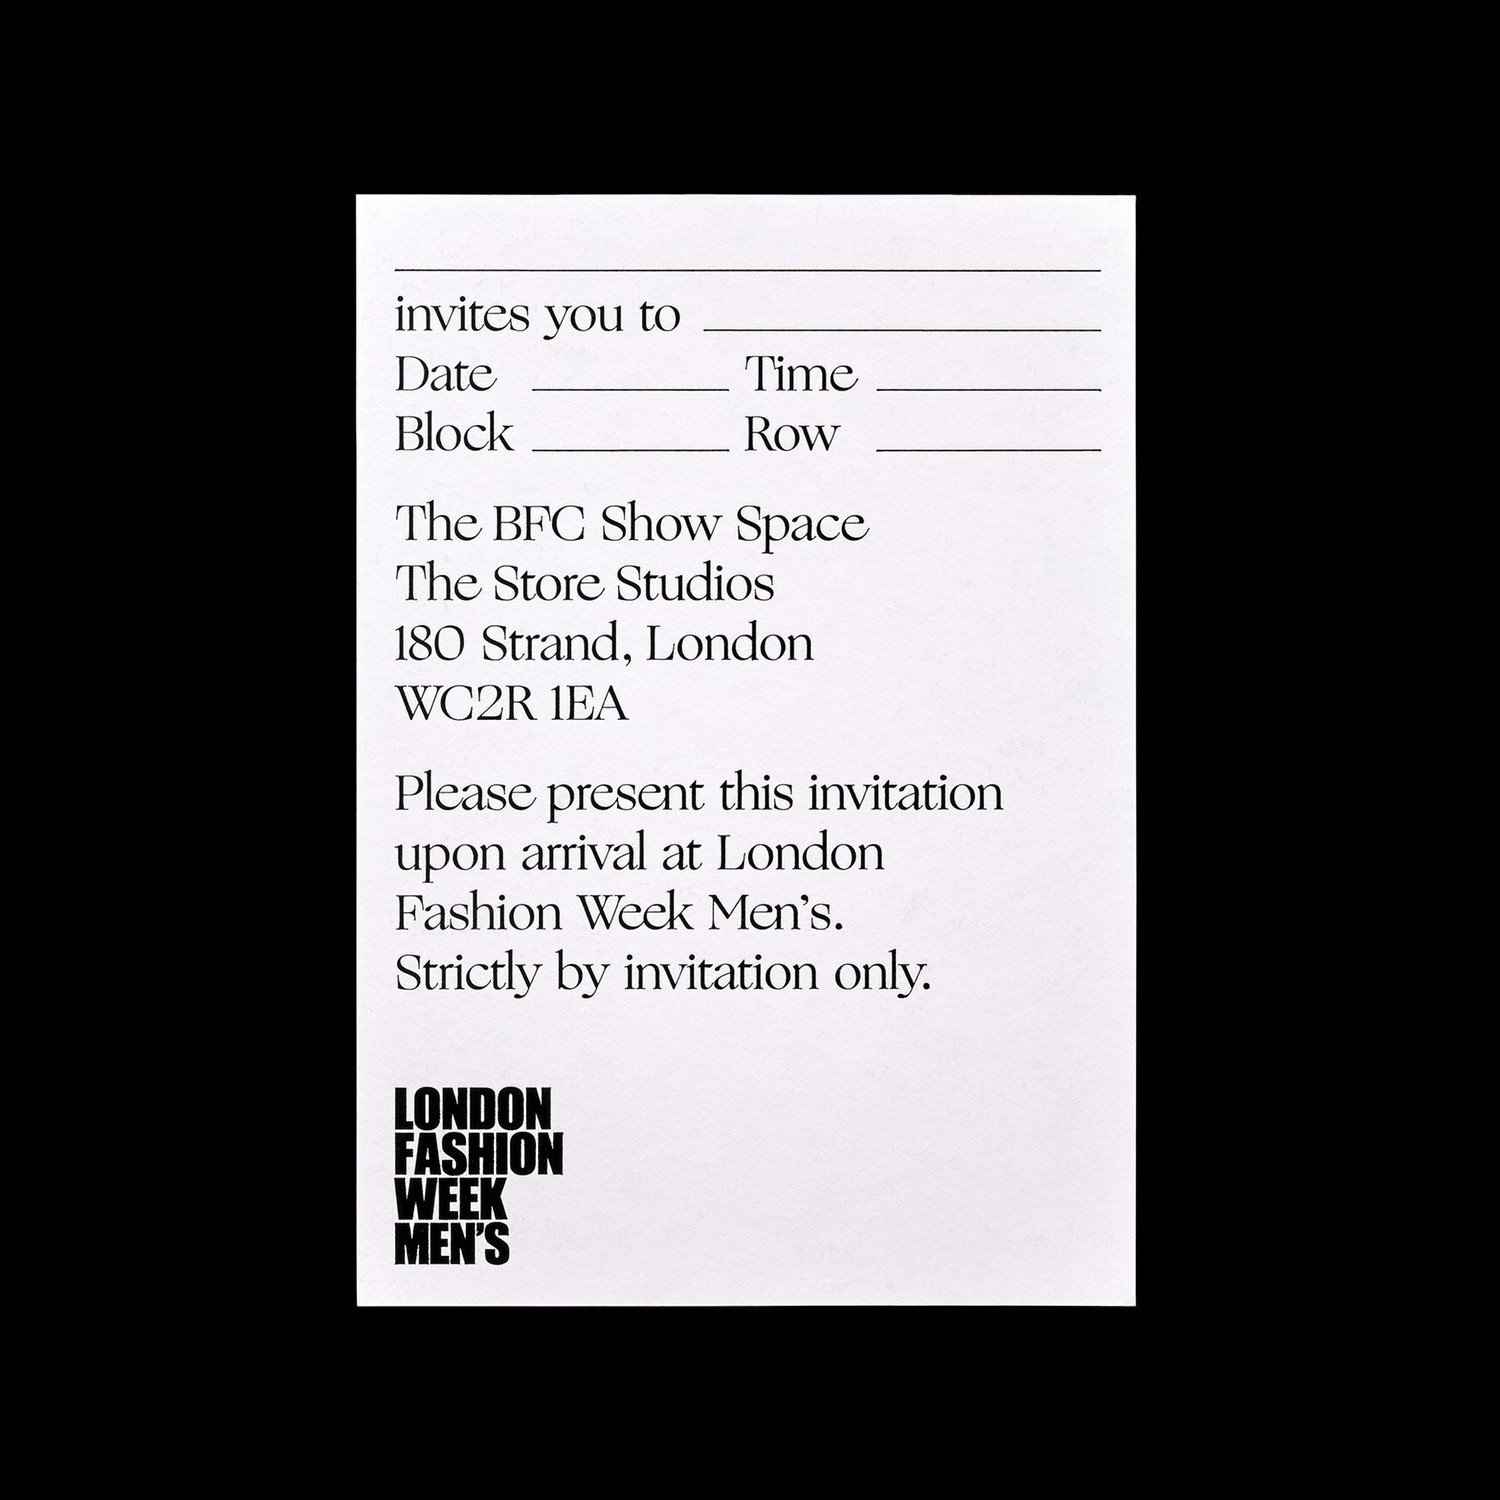 Graphic identity and invitation for London Fashion Week Men's by Pentagram